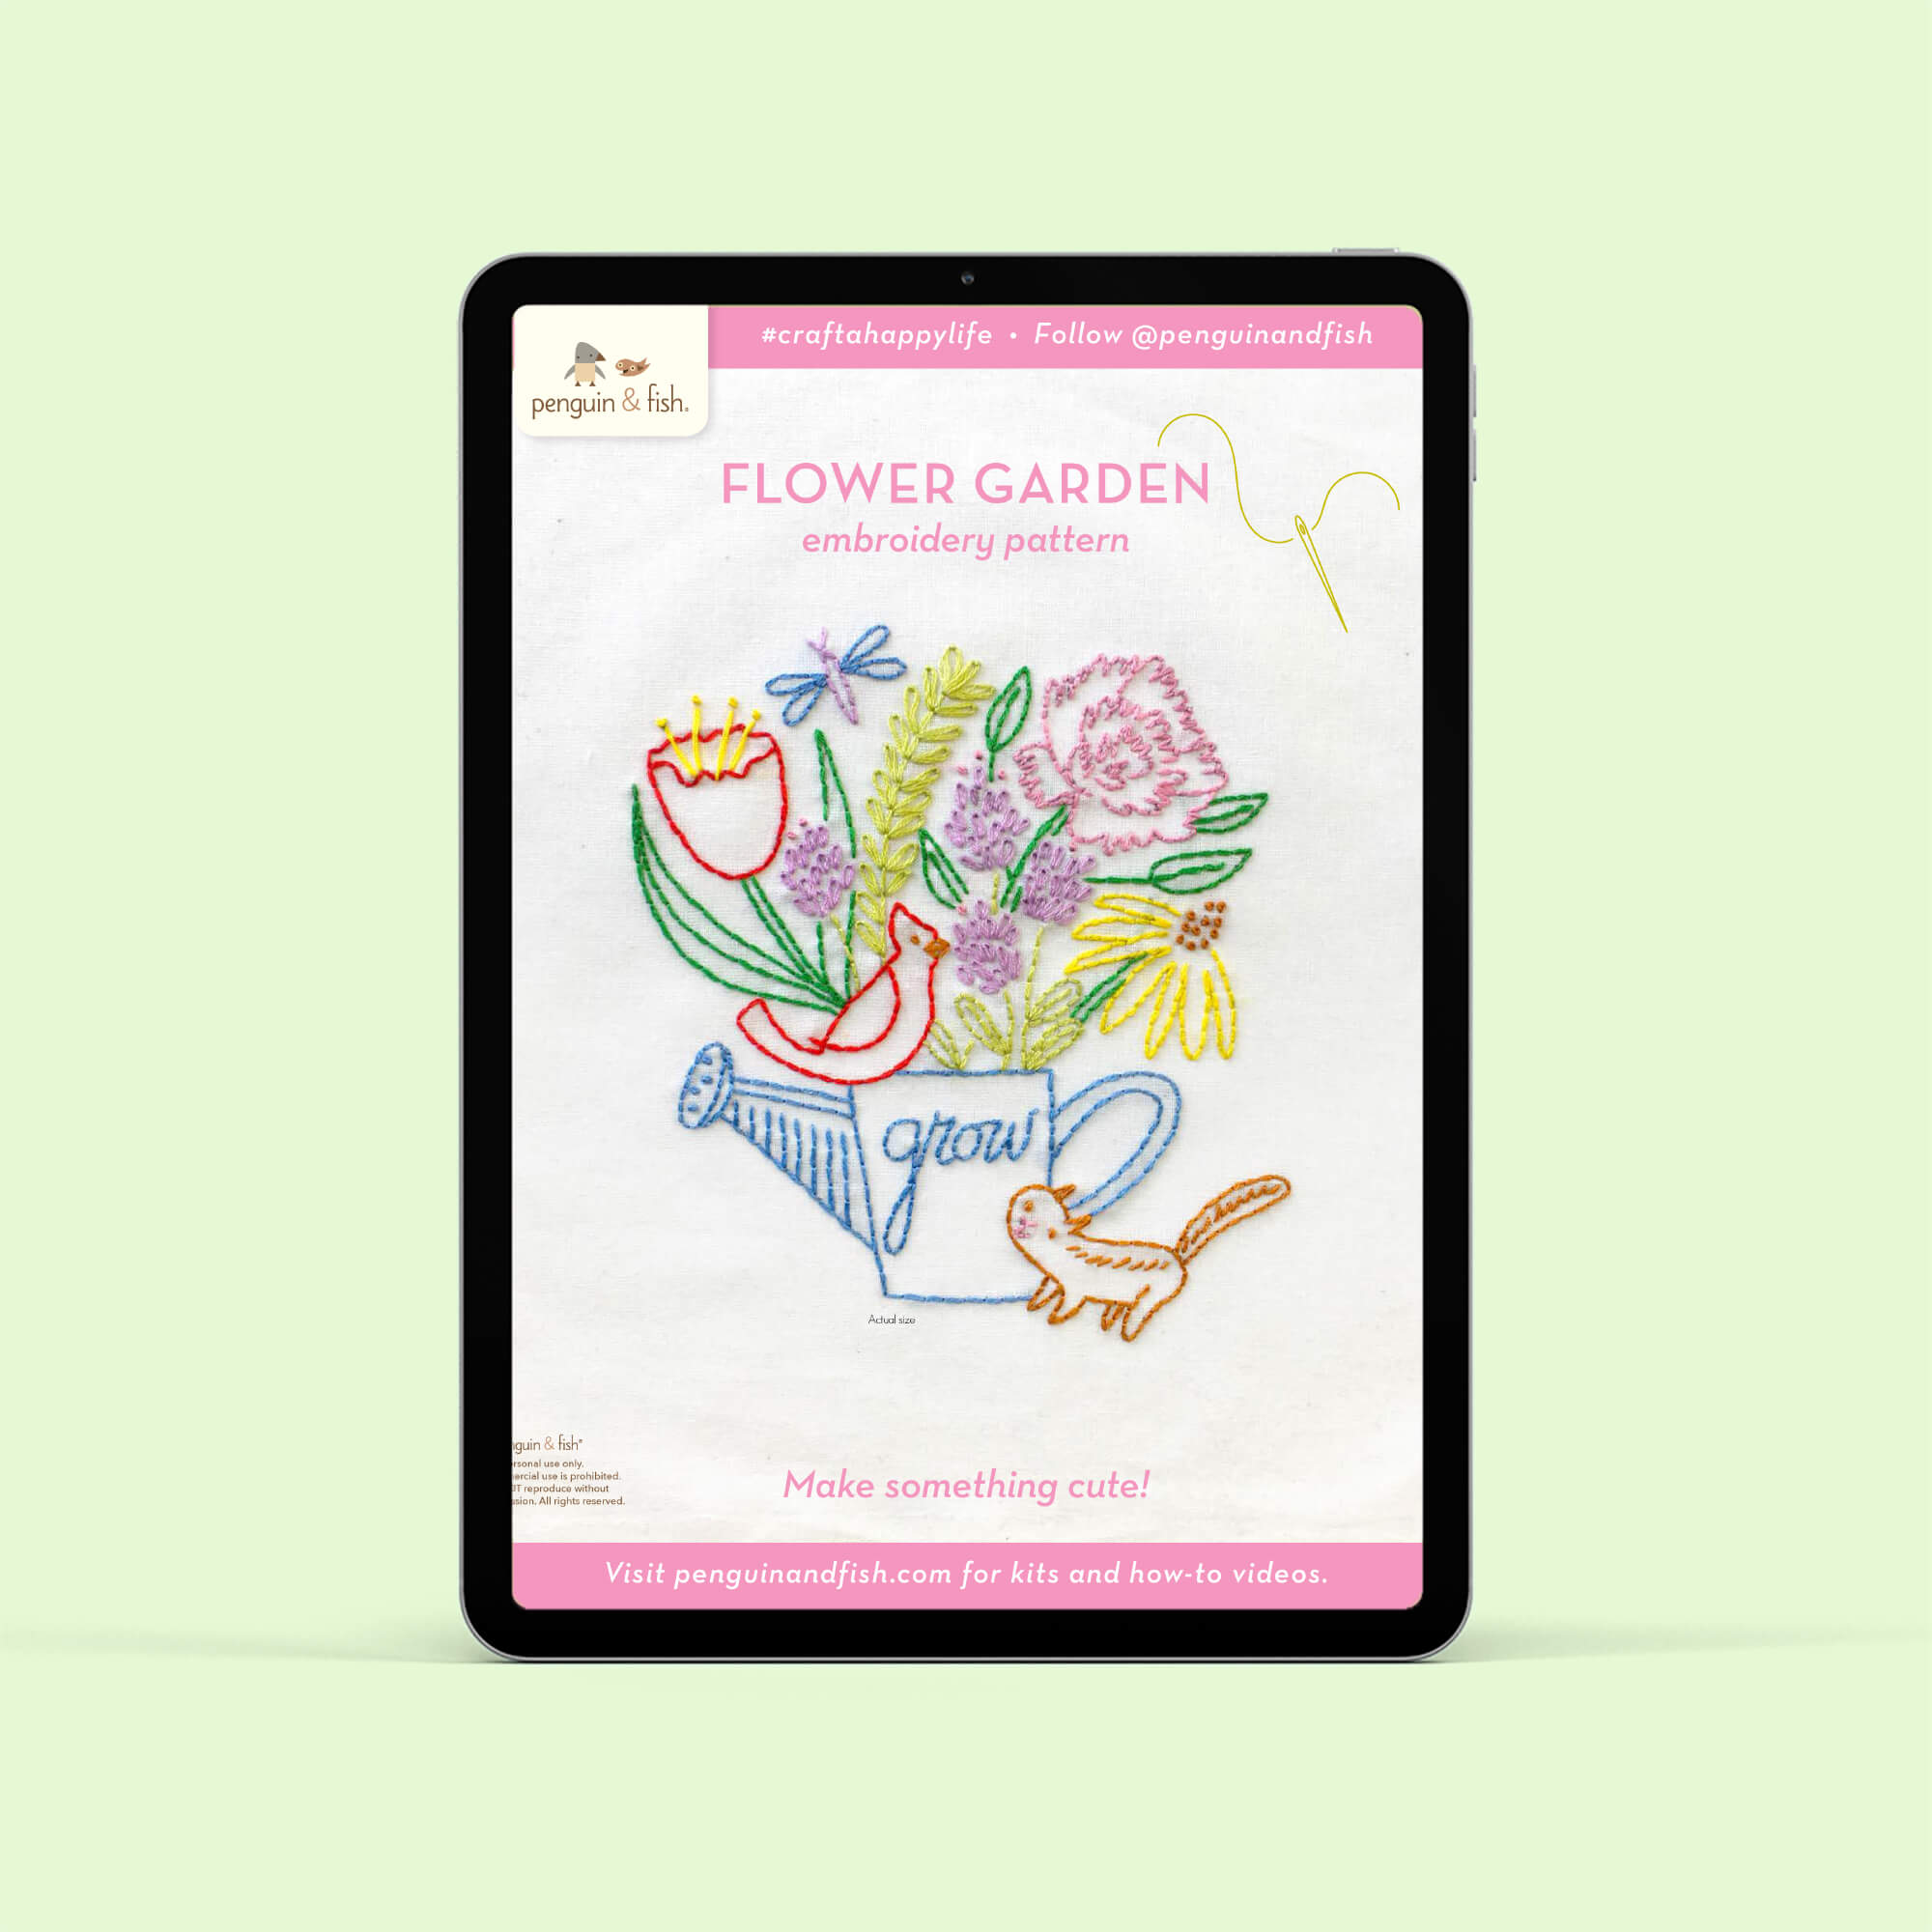 Flower Garden PDF embroidery pattern shown on a tablet